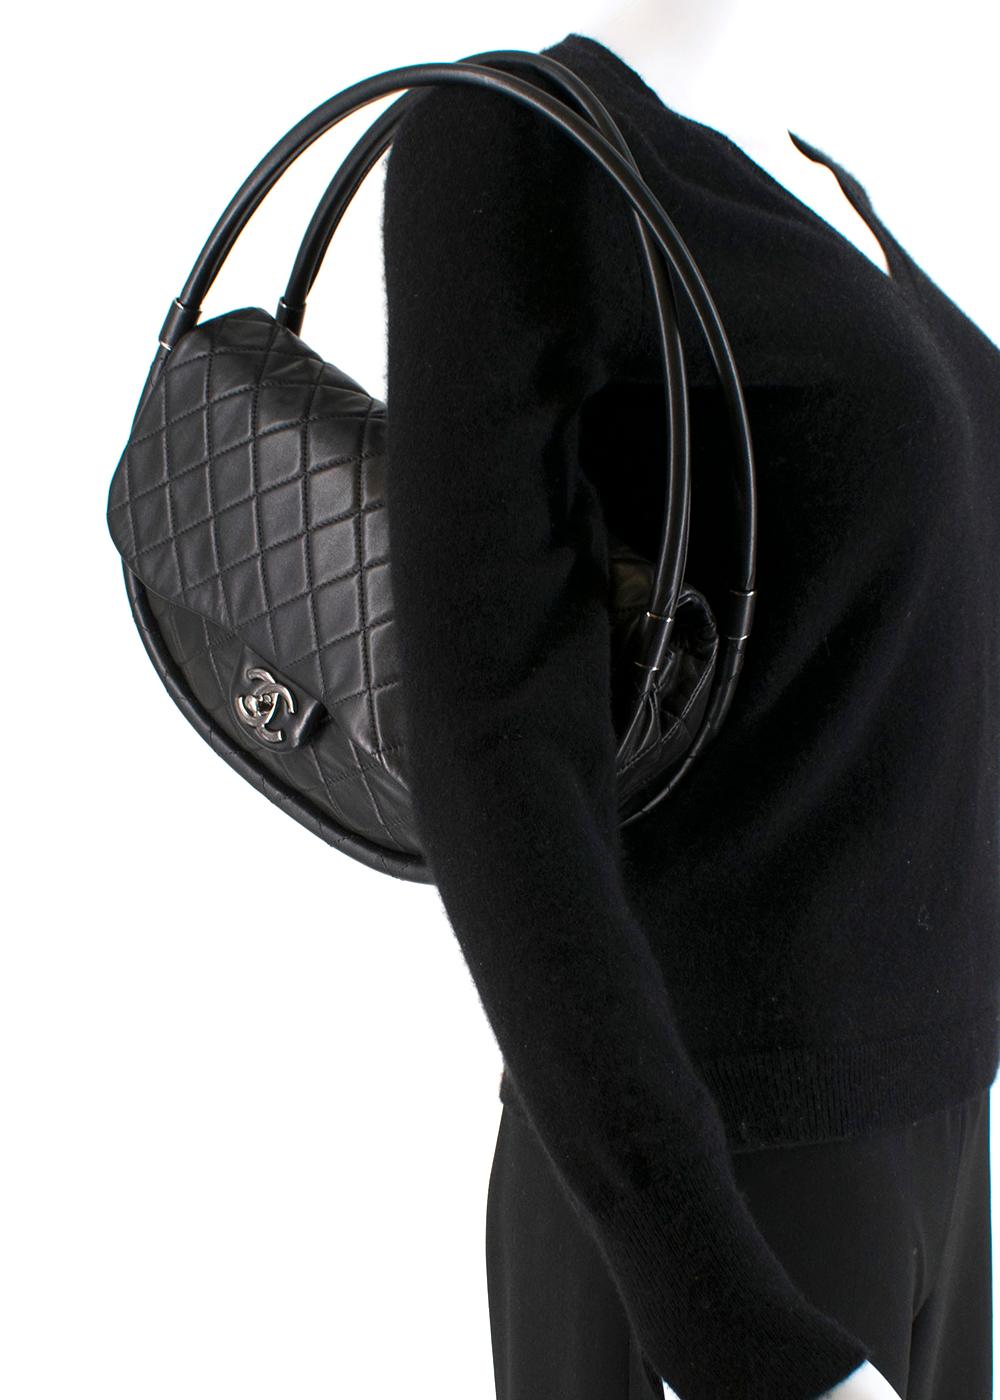 Chanel Black Lambskin Medium Wind Power Hula Hoop Bag In New Condition For Sale In London, GB